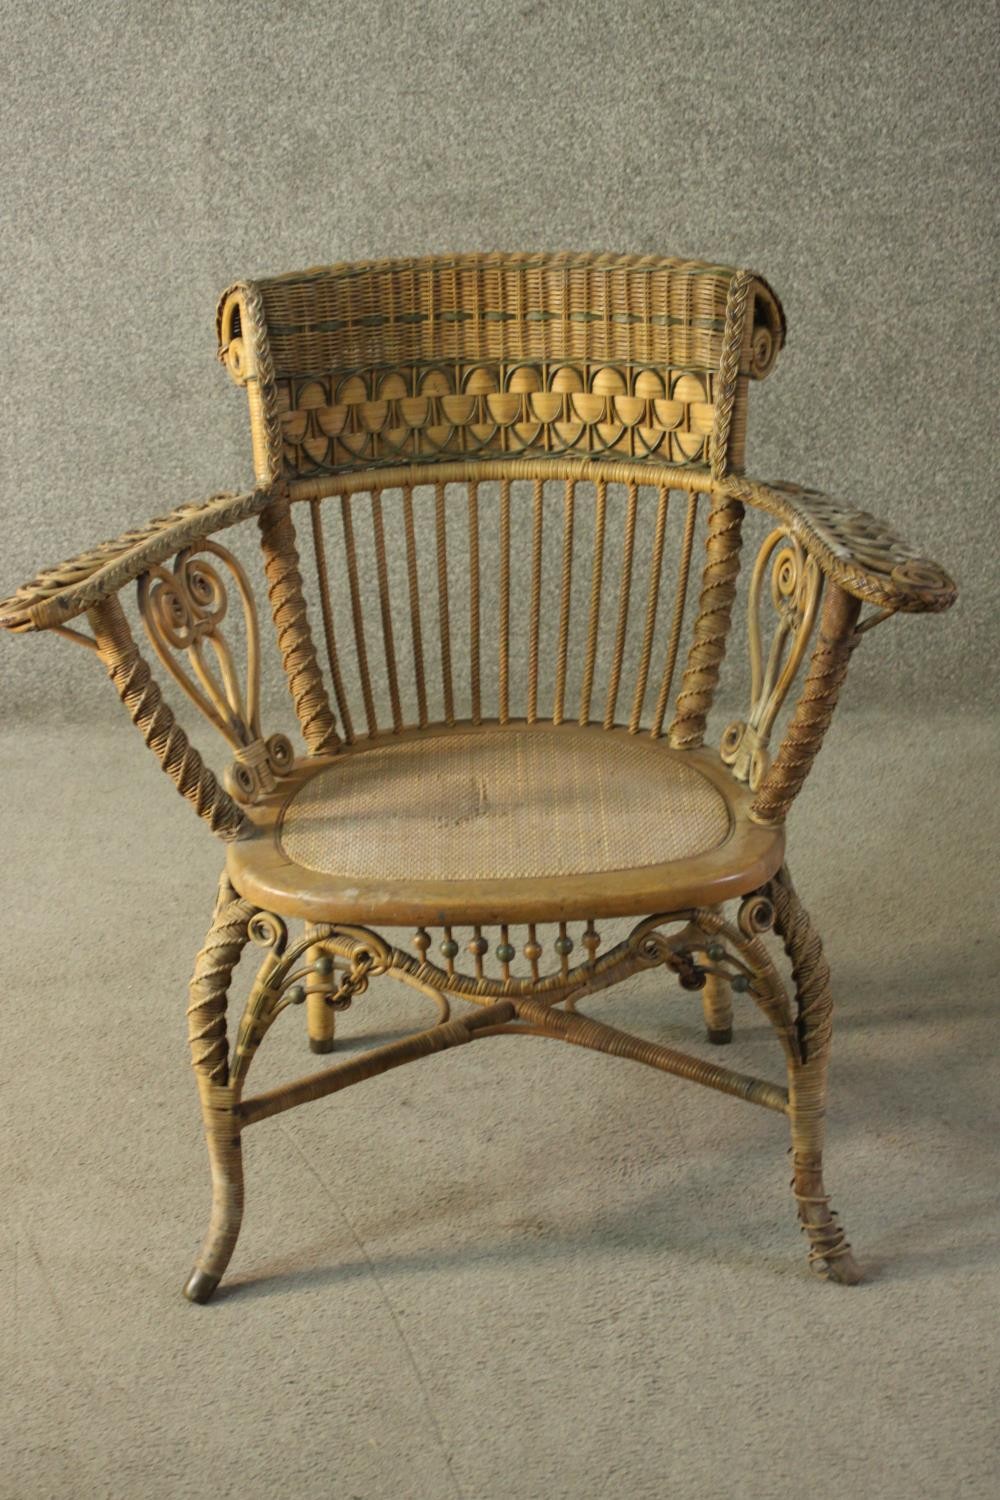 A late 19th/early 20th century wicker open armchair, with a rattan woven backrest, the arms with